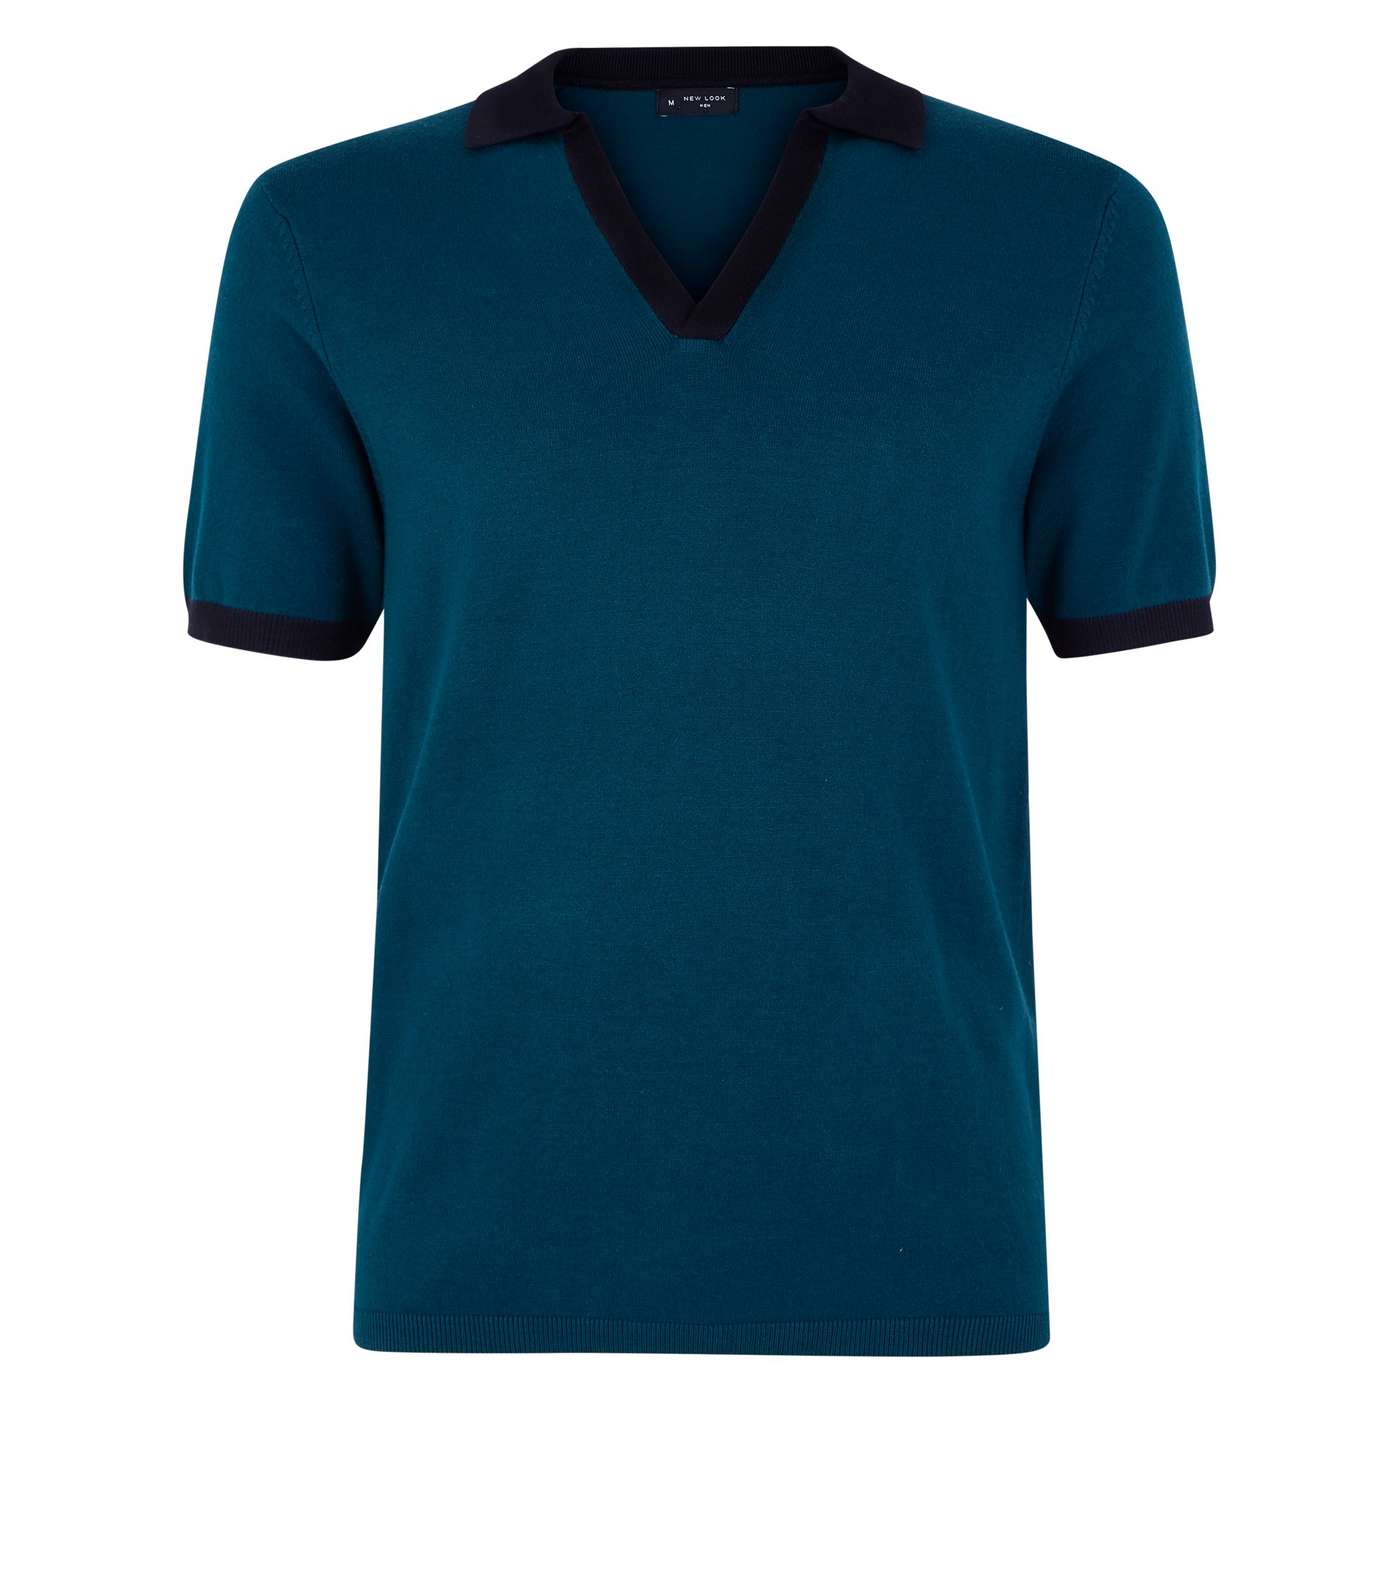 Teal White Revere Collar Knit Polo Shirt Image 4